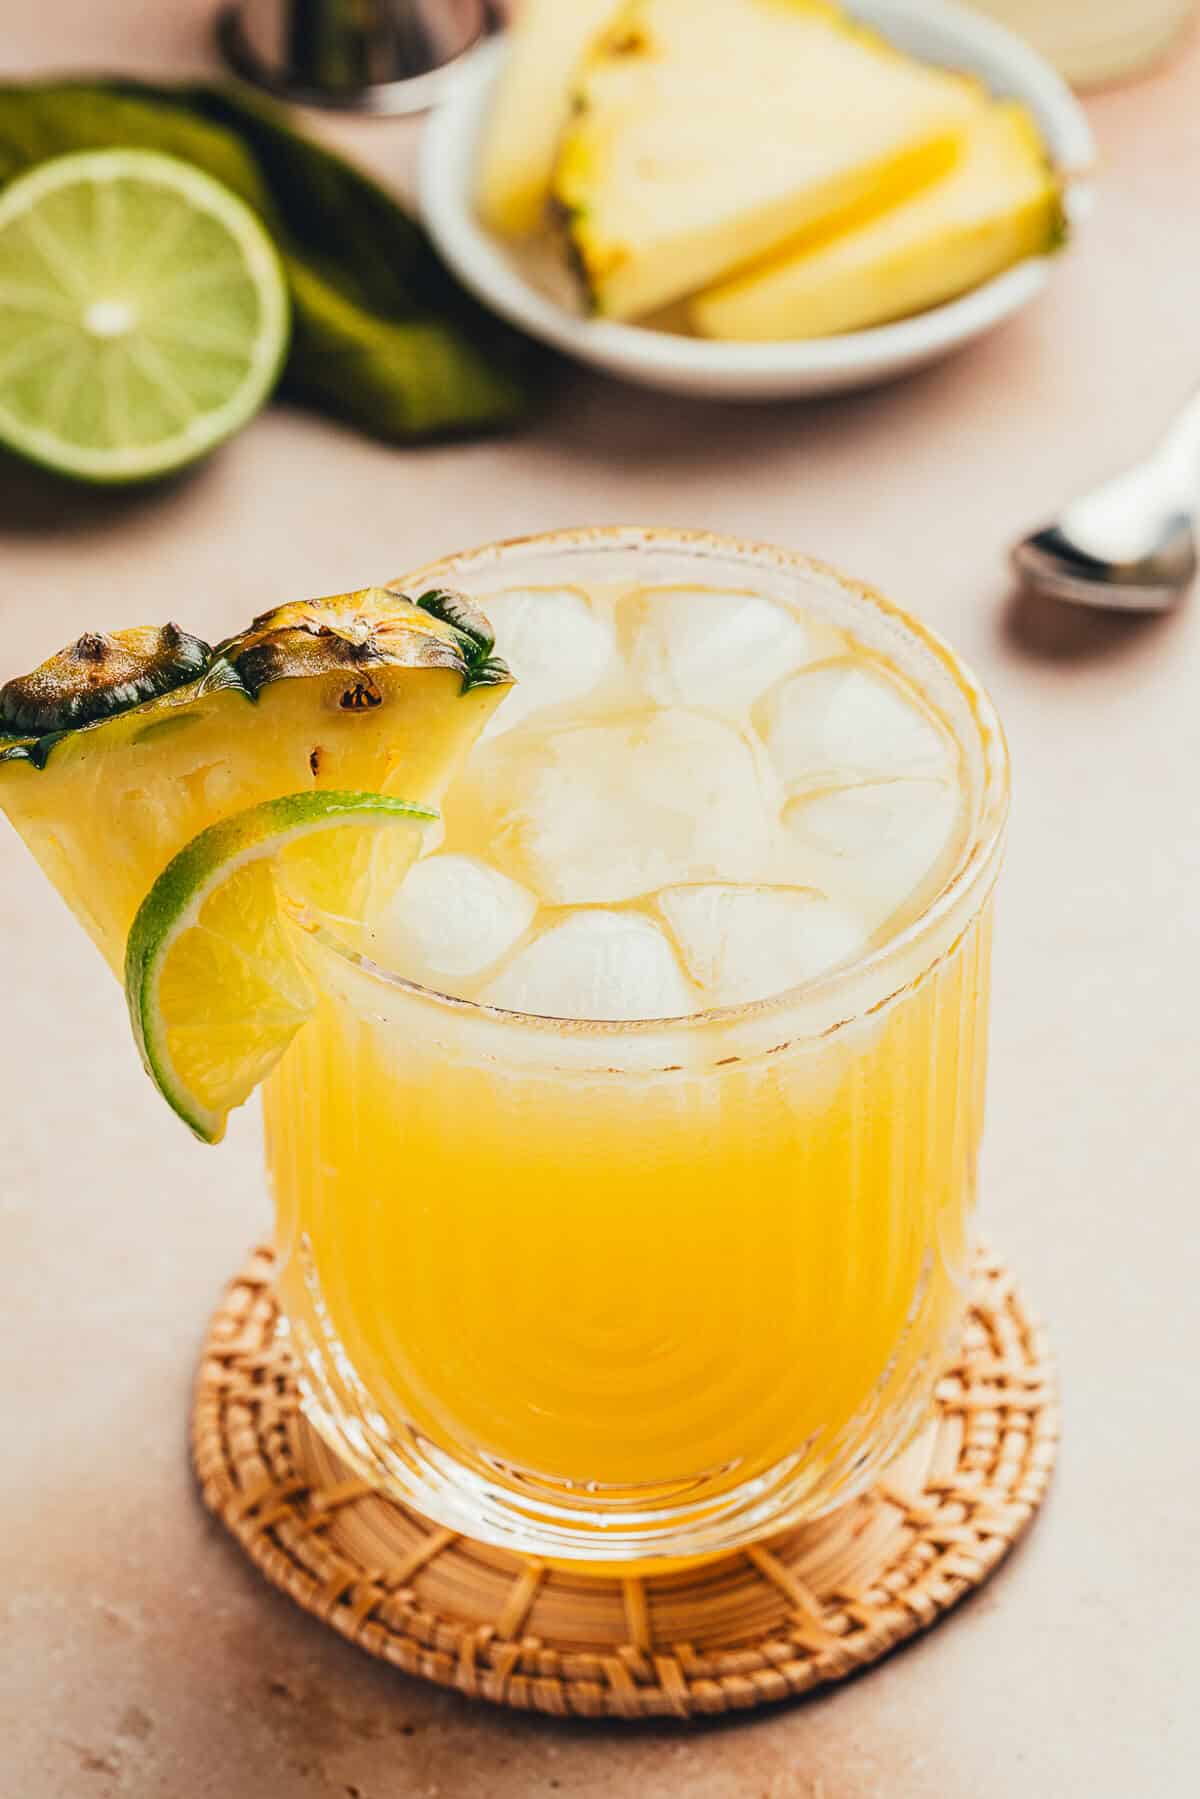 A pineapple ginger beer mocktail garnished with a slice of lime and pineapple wedge. Pineapple slices and lime slices are in the background.